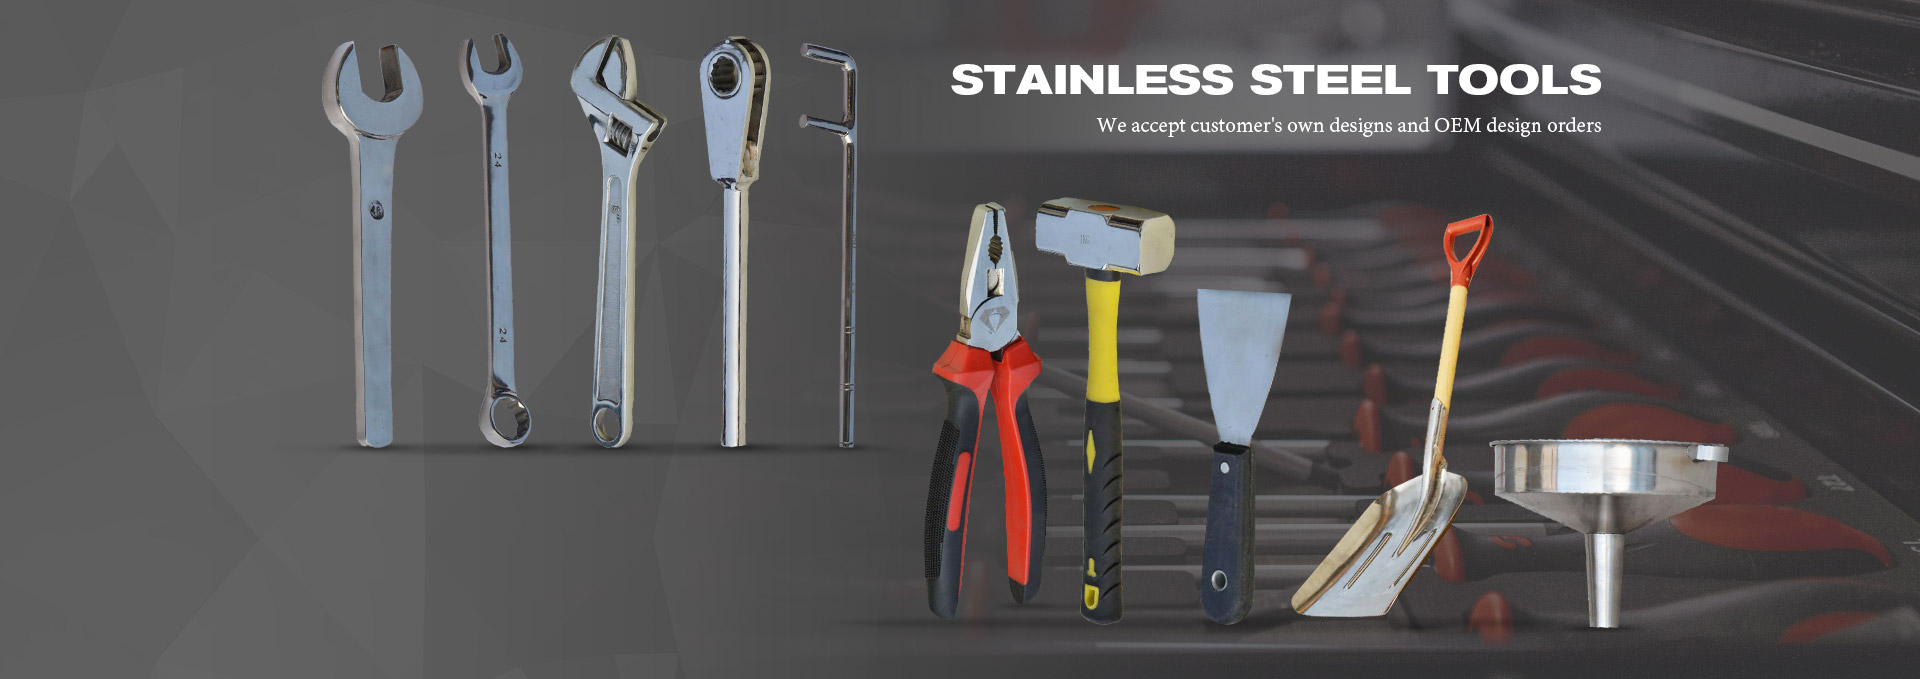 STAINLESS STEEL TOOLS